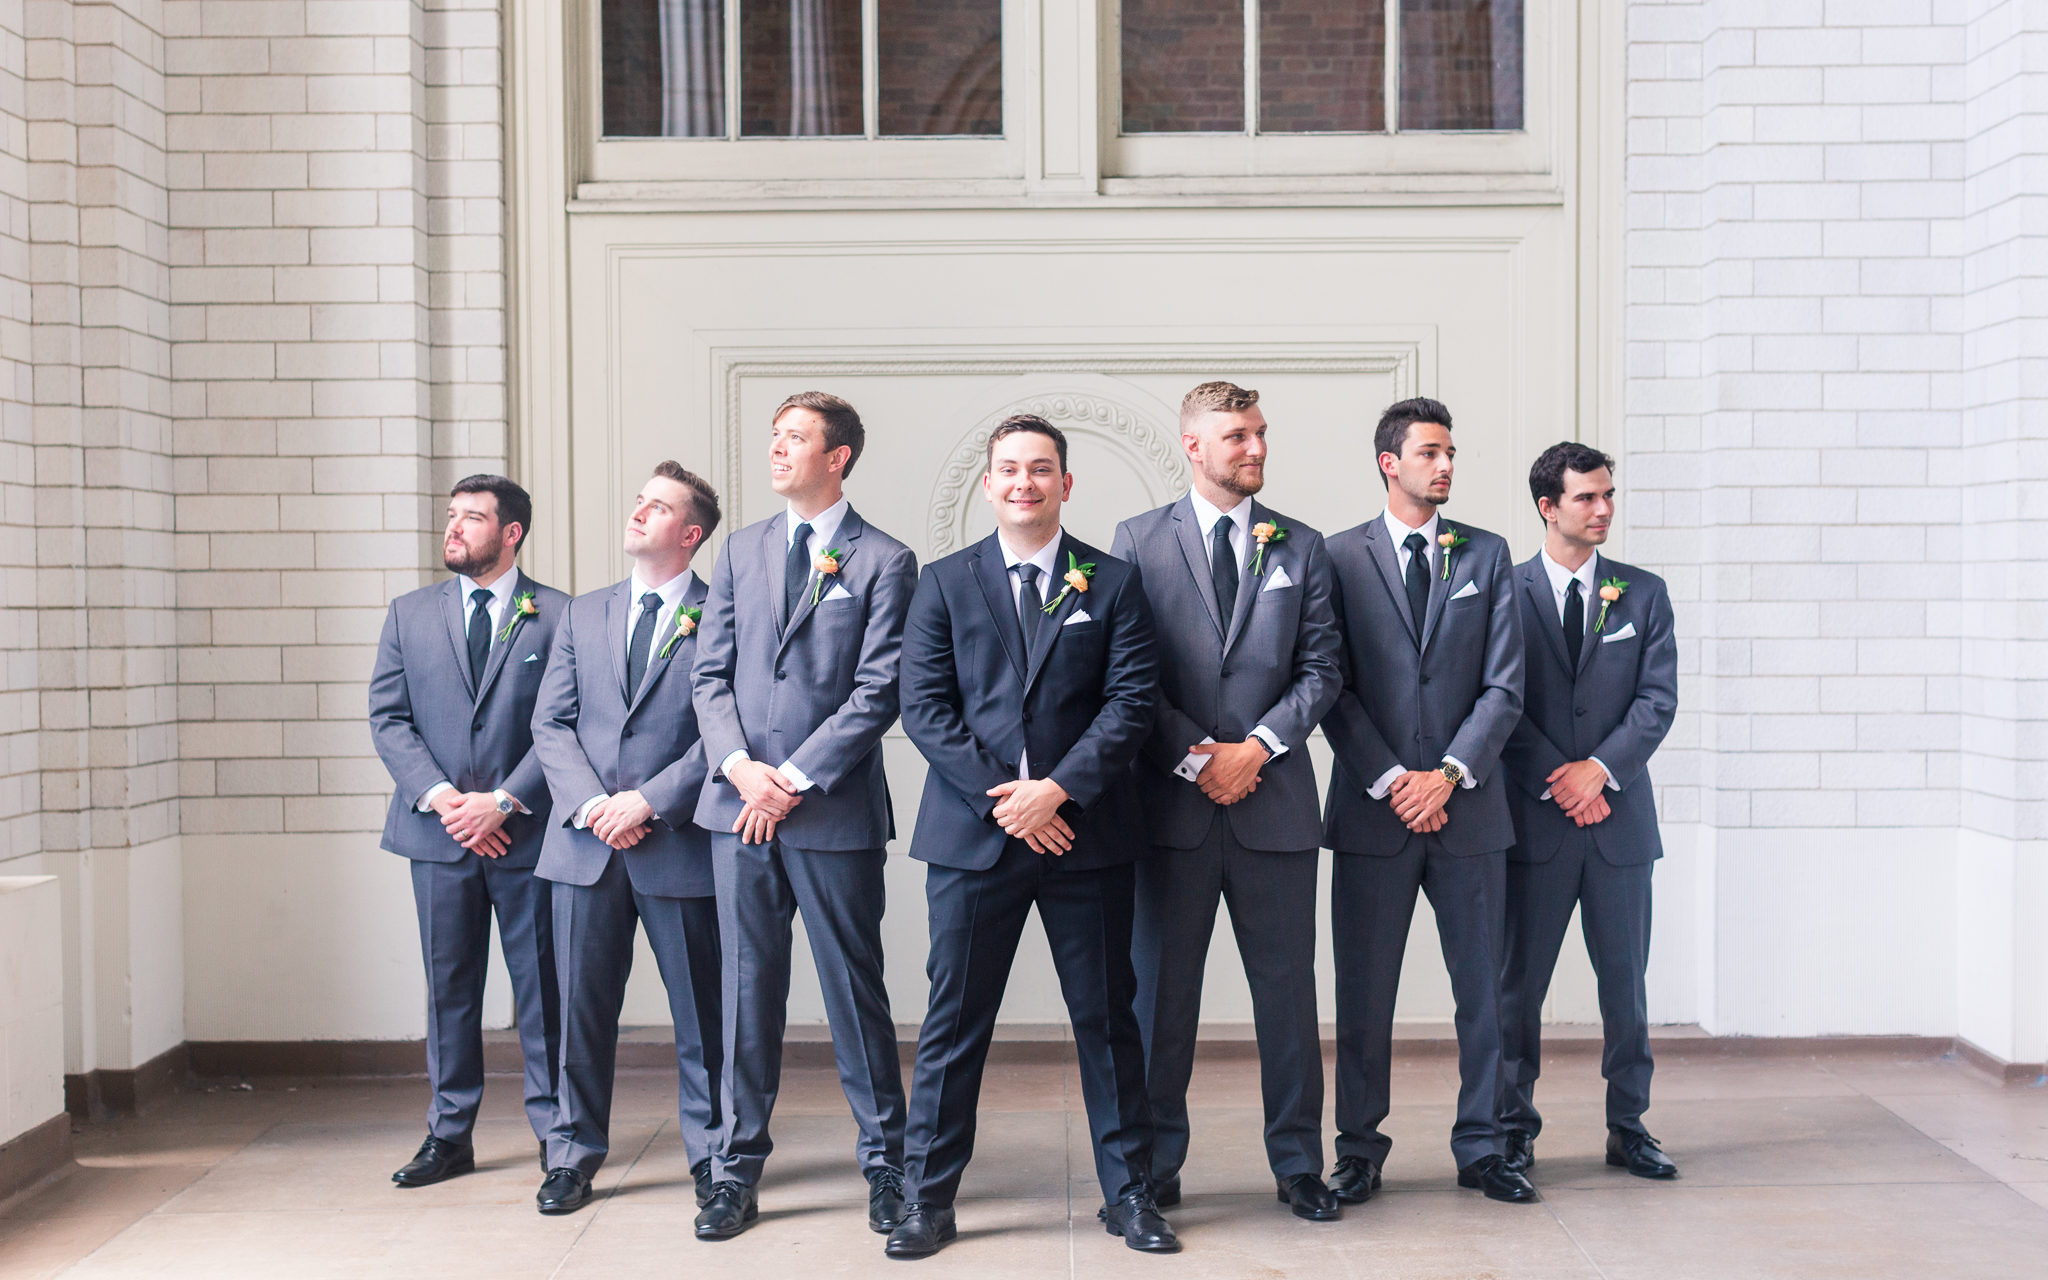 Grooms and groomsmen group portrait in blue suits